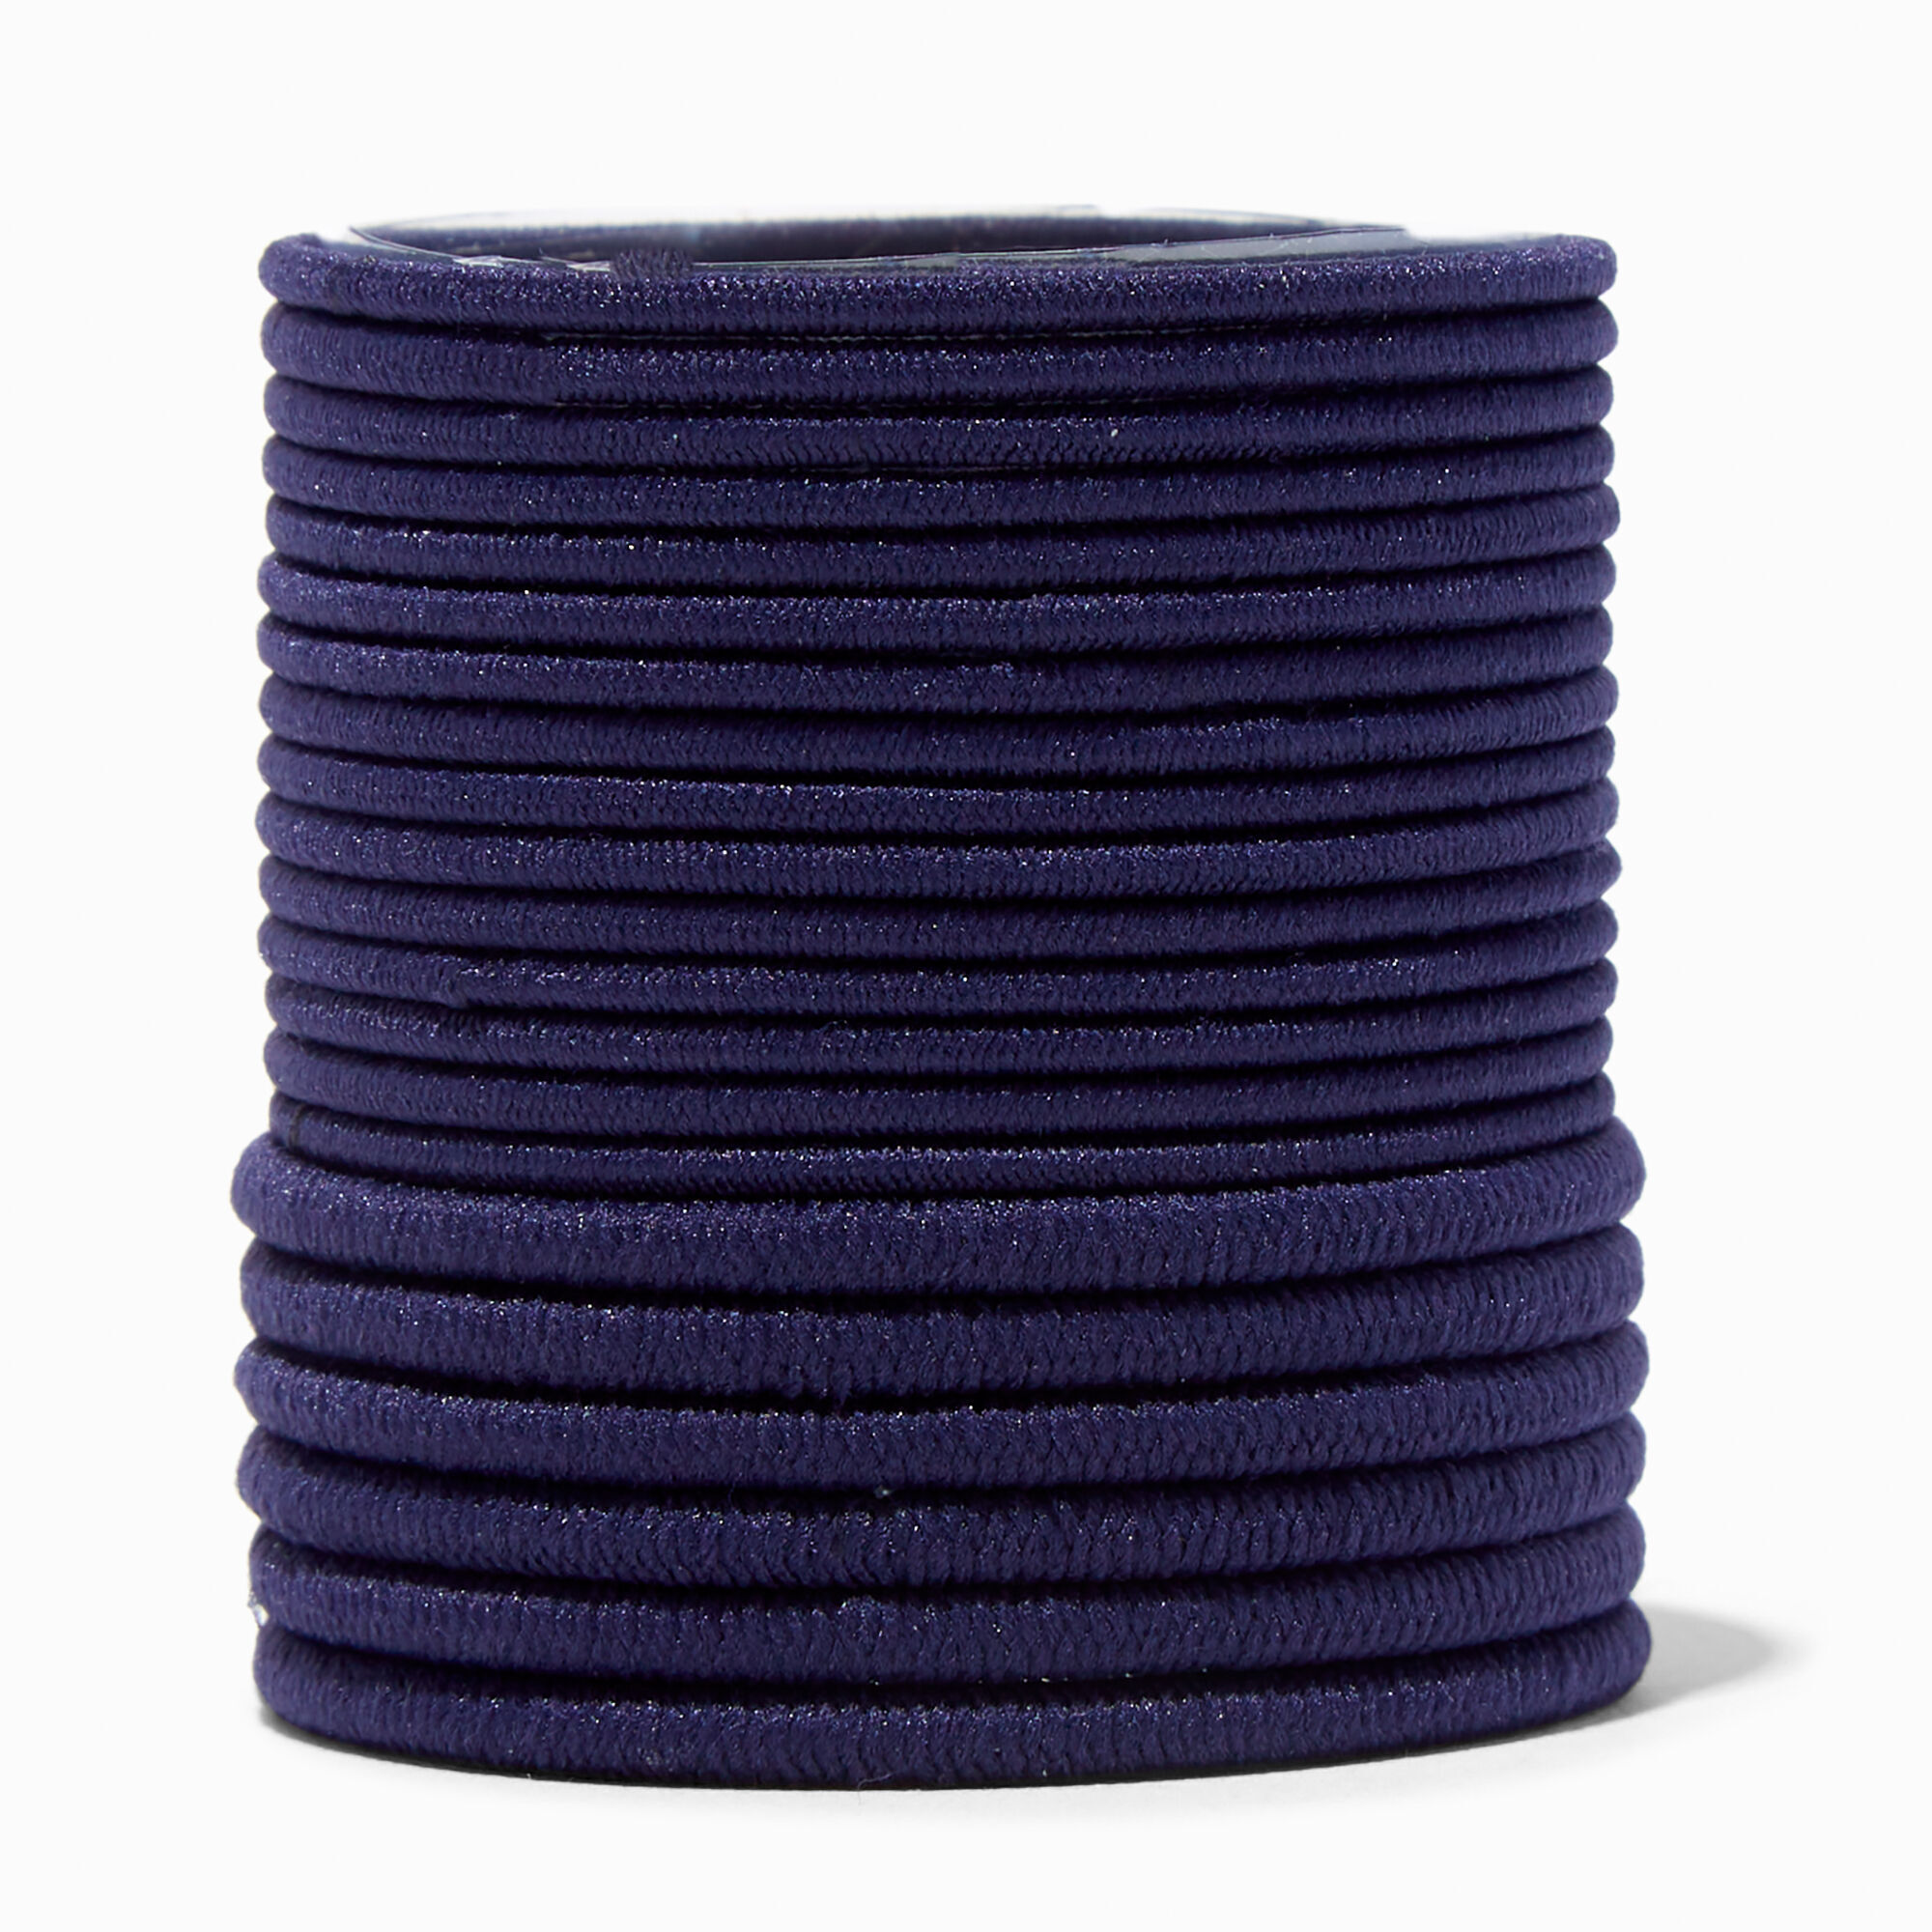 claire's navy blue luxe hair ties - 21 pack